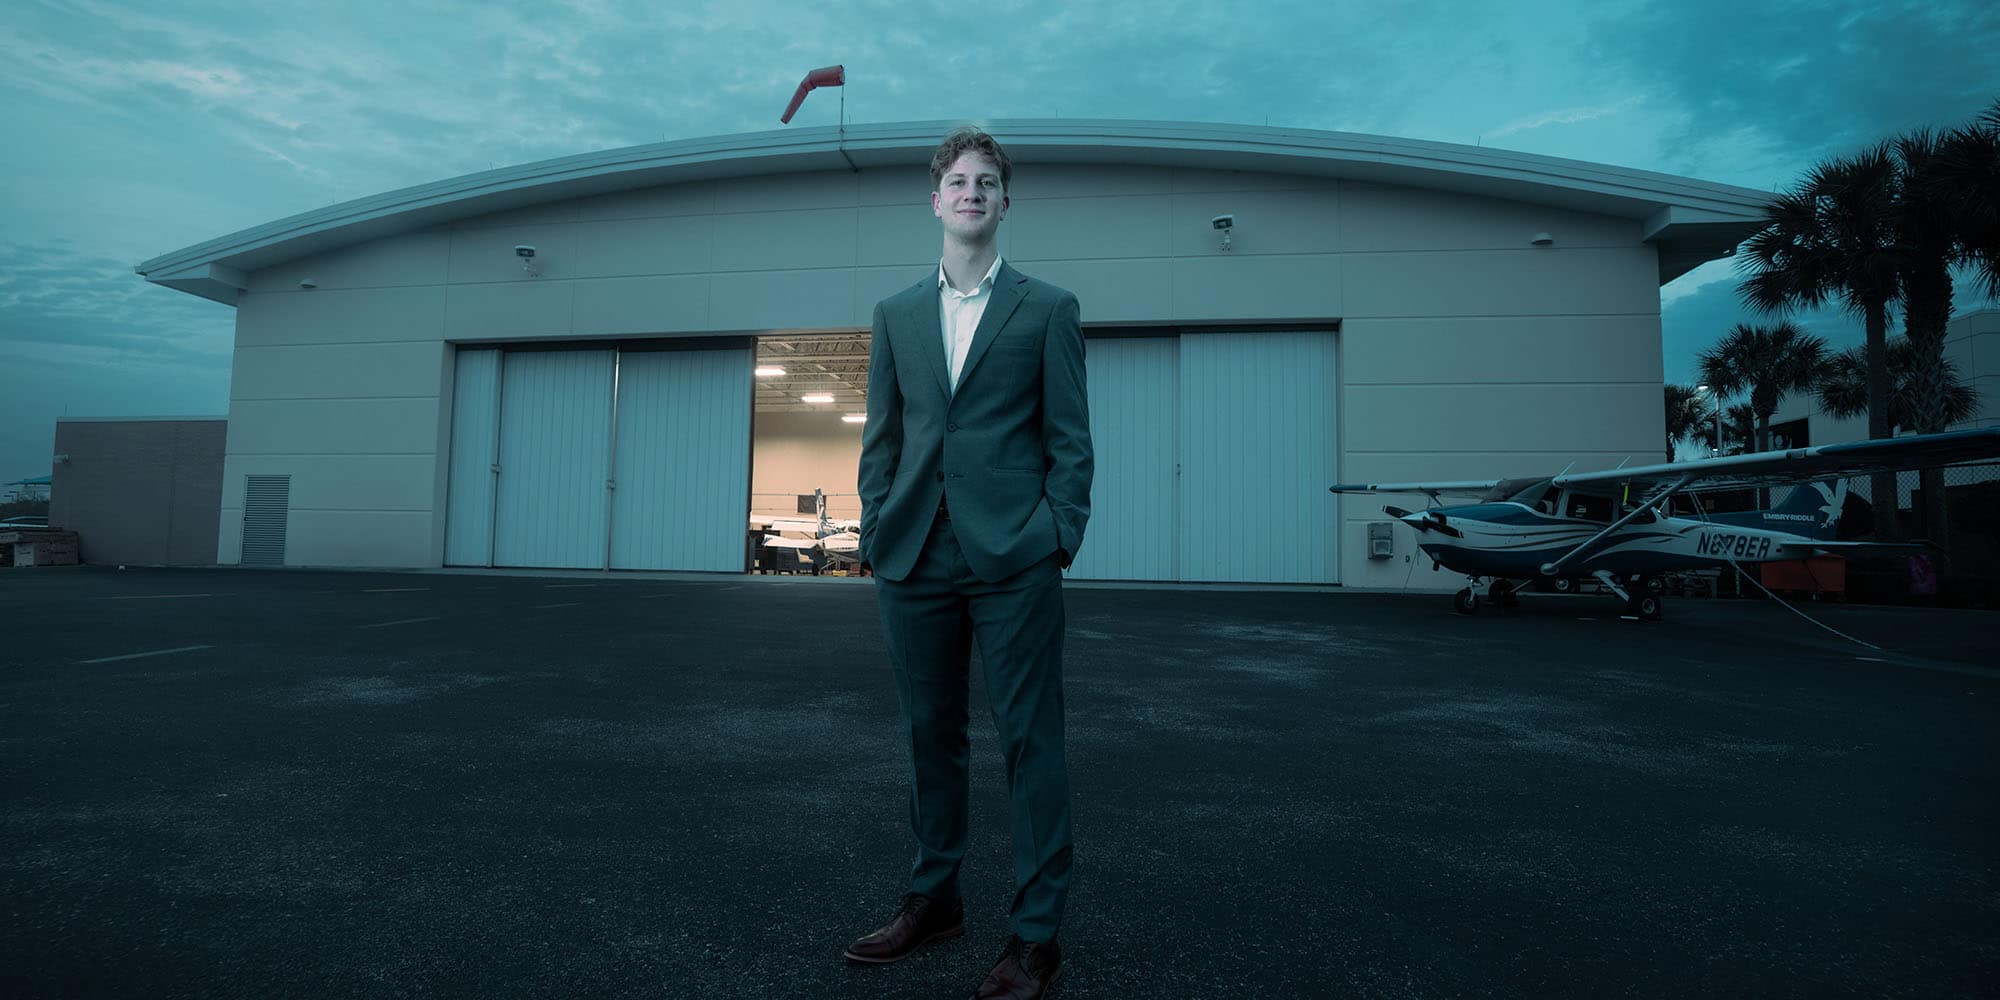 Arthur wears a business suit and no tie, posing in front of a hangar at dusk.